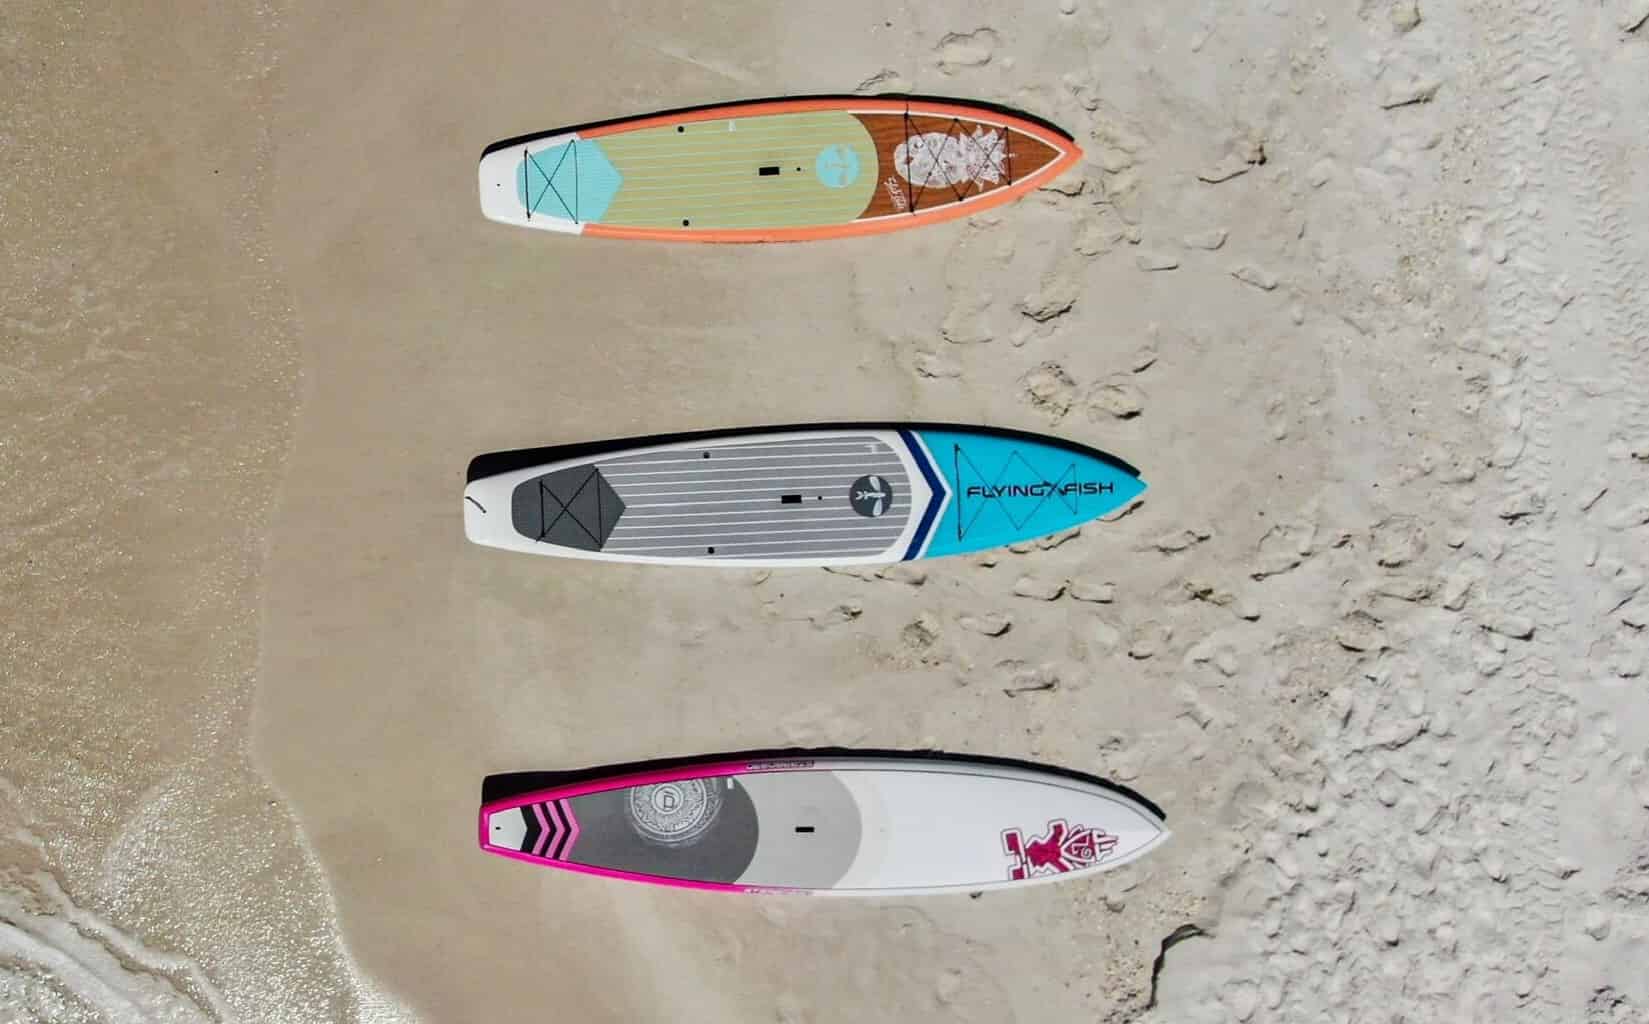 8-Stand-Up-Paddle-Board-Rental-with-WET-Inc